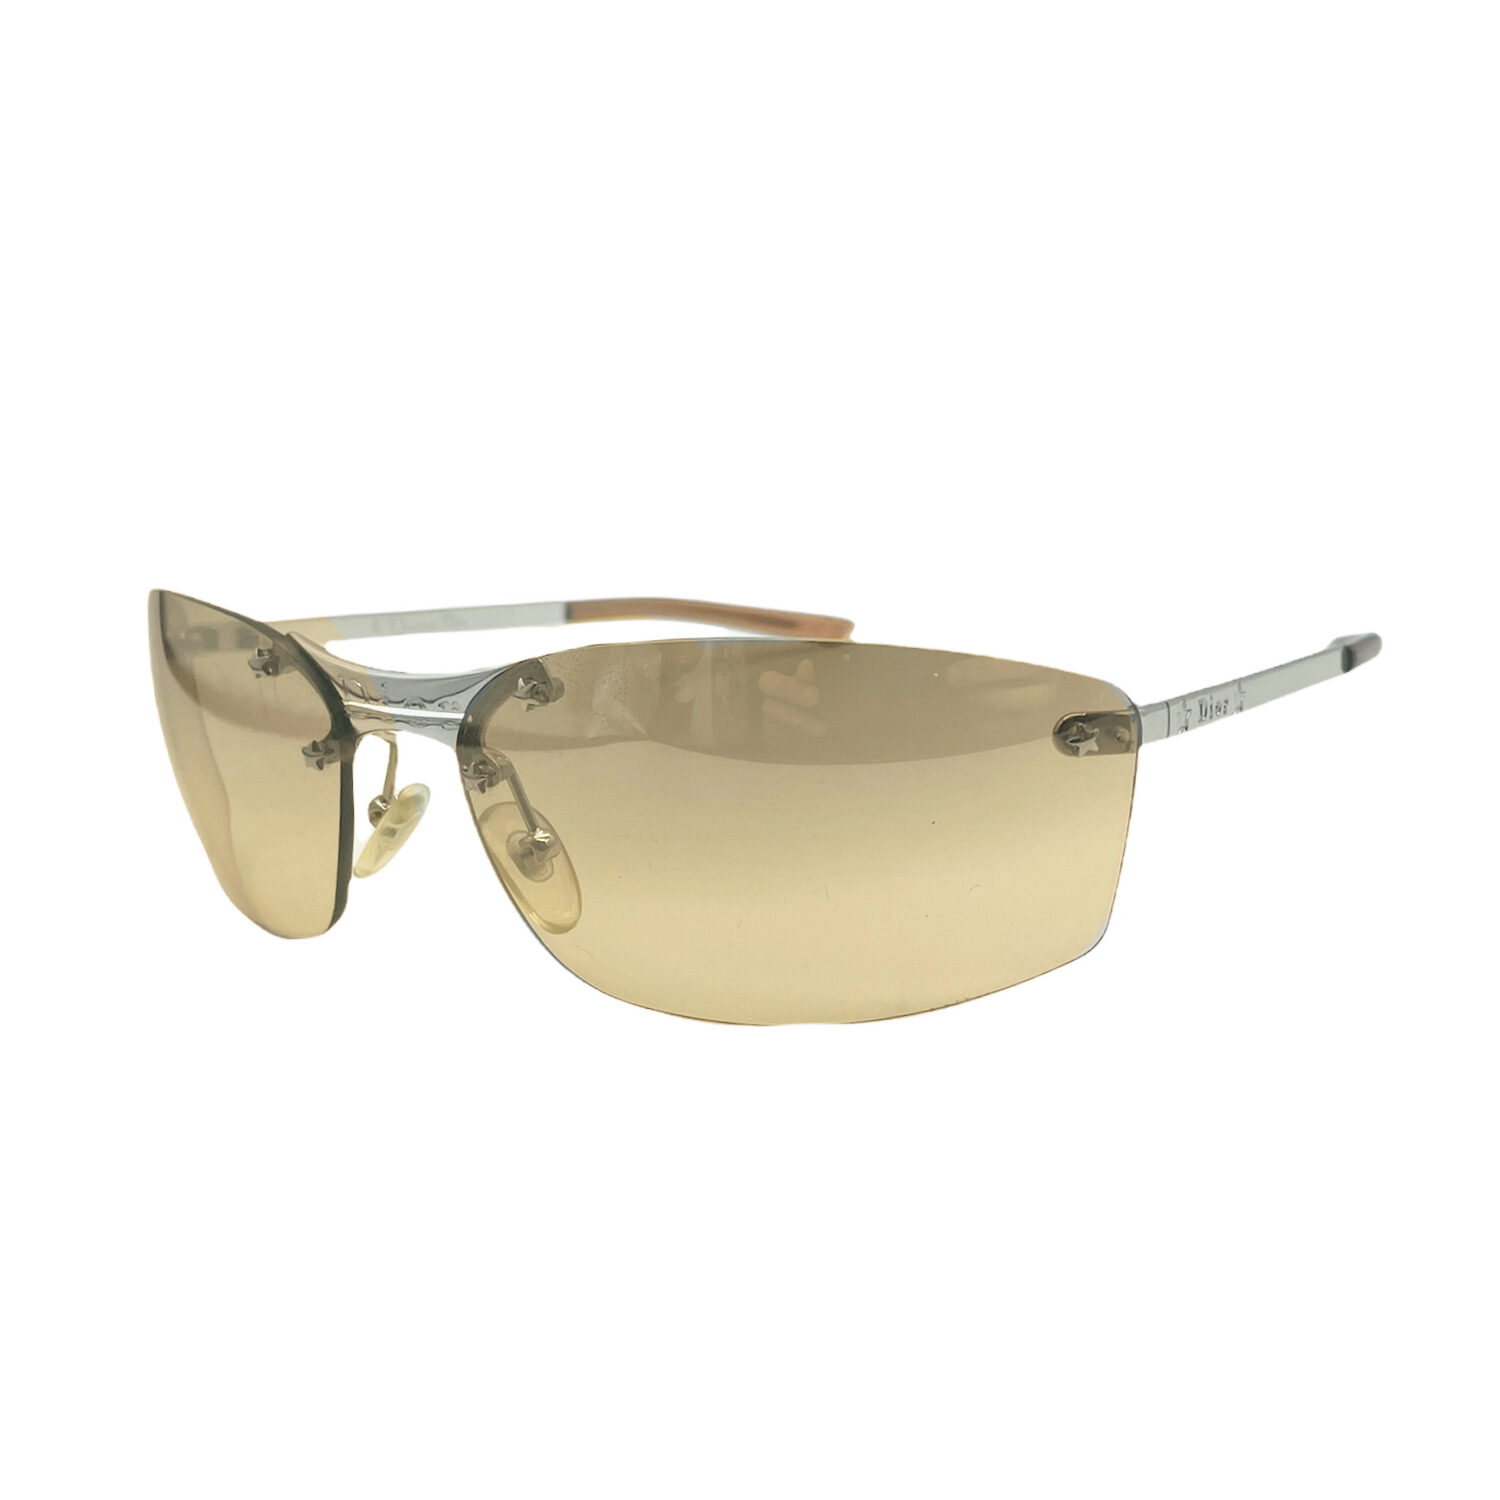 Vintage Dior Rimless Tinted Sunglasses in Tan and Silver | NITRYL